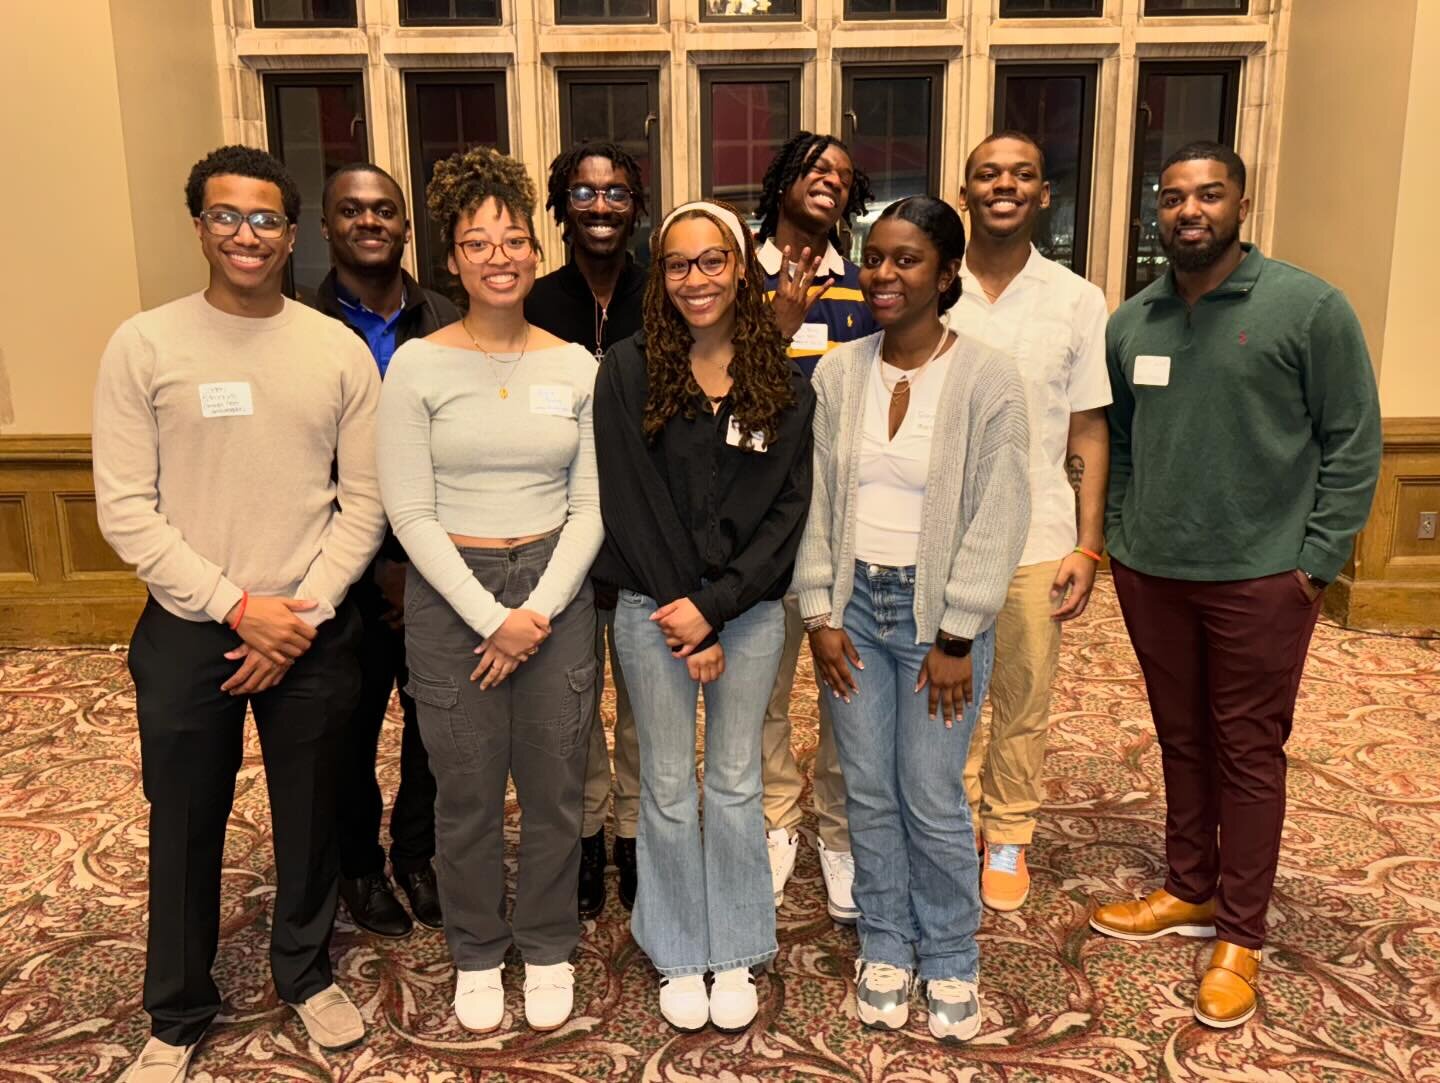 Some of FBL IU team members got to attend the Spring Building Bridges Dinner. This event was sponsored by the Bias Response and Education Office and the United Council for Equity. It was amazing to network with a group of student leaders from various